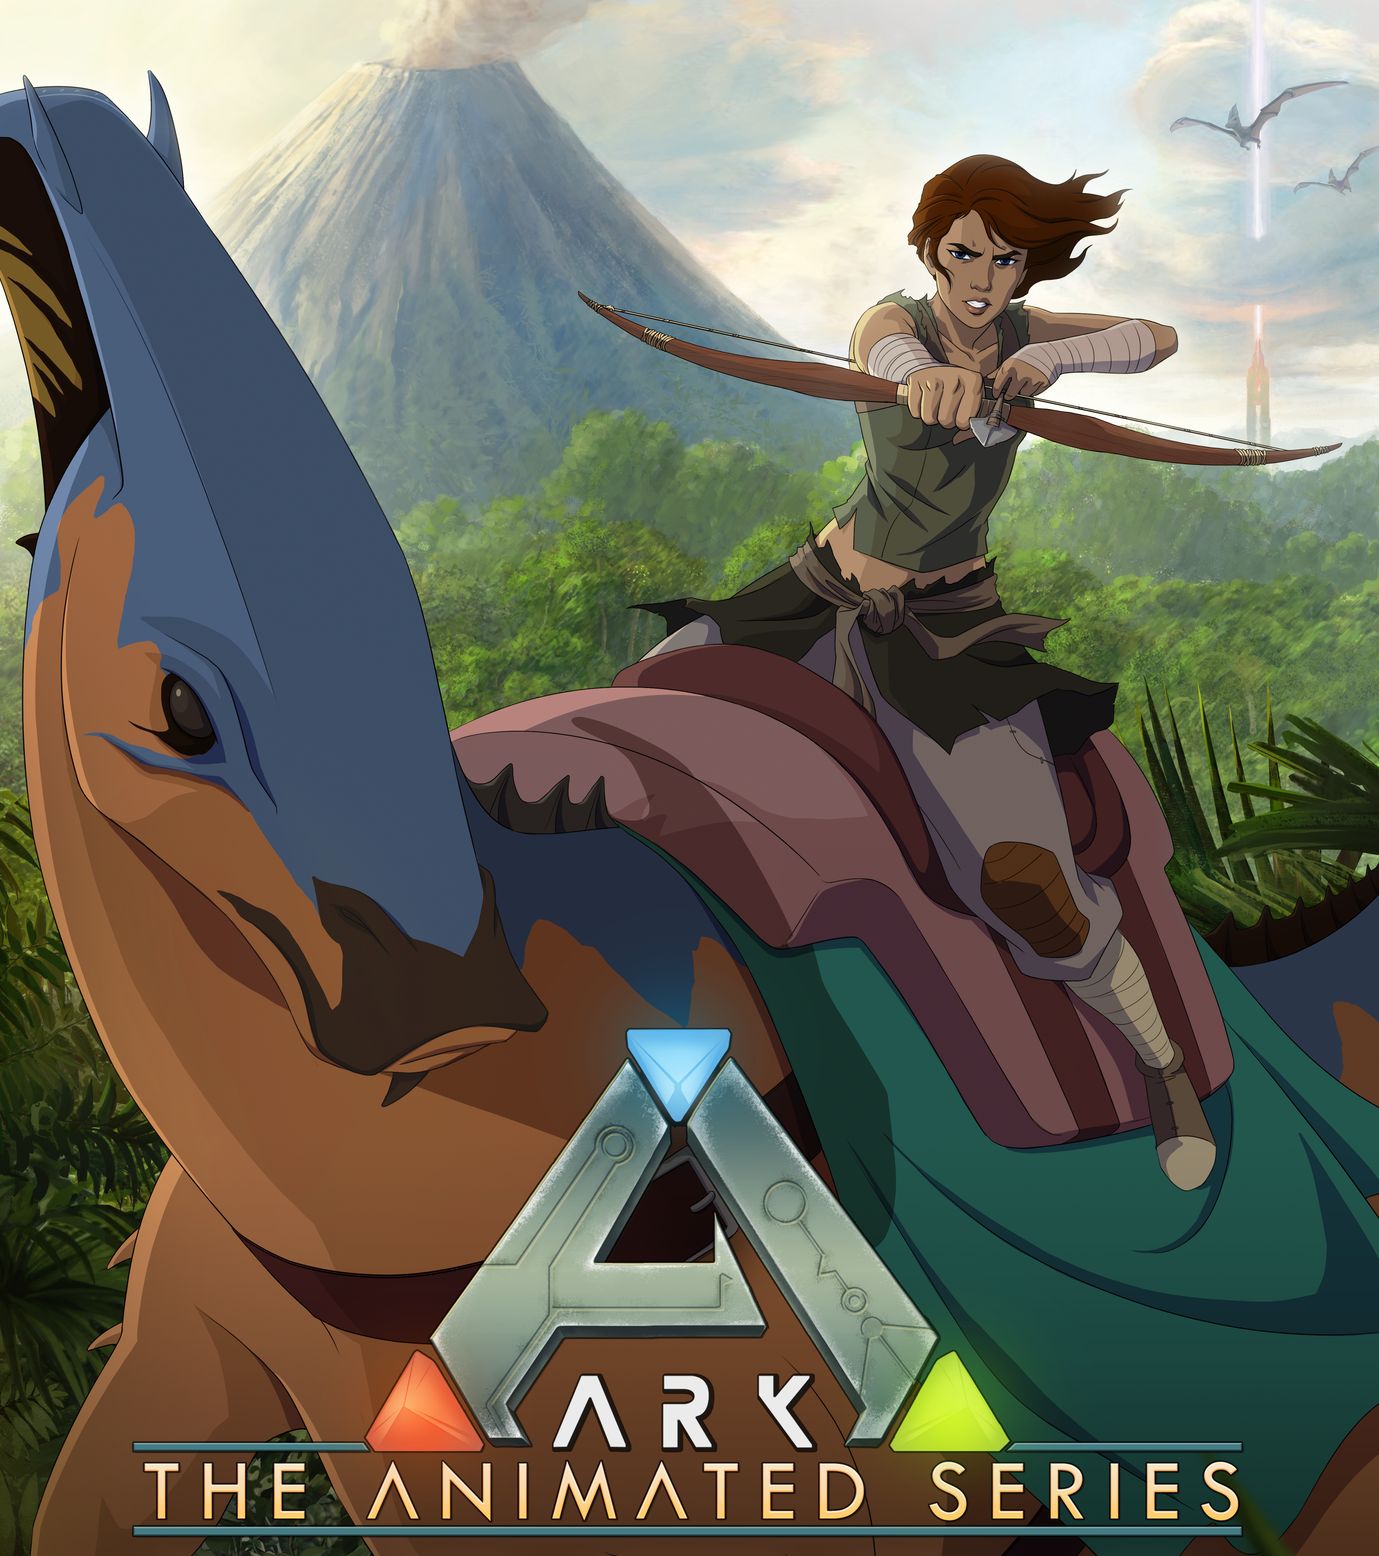 Image for Here's an extended cut trailer for Ark: The Animated Series